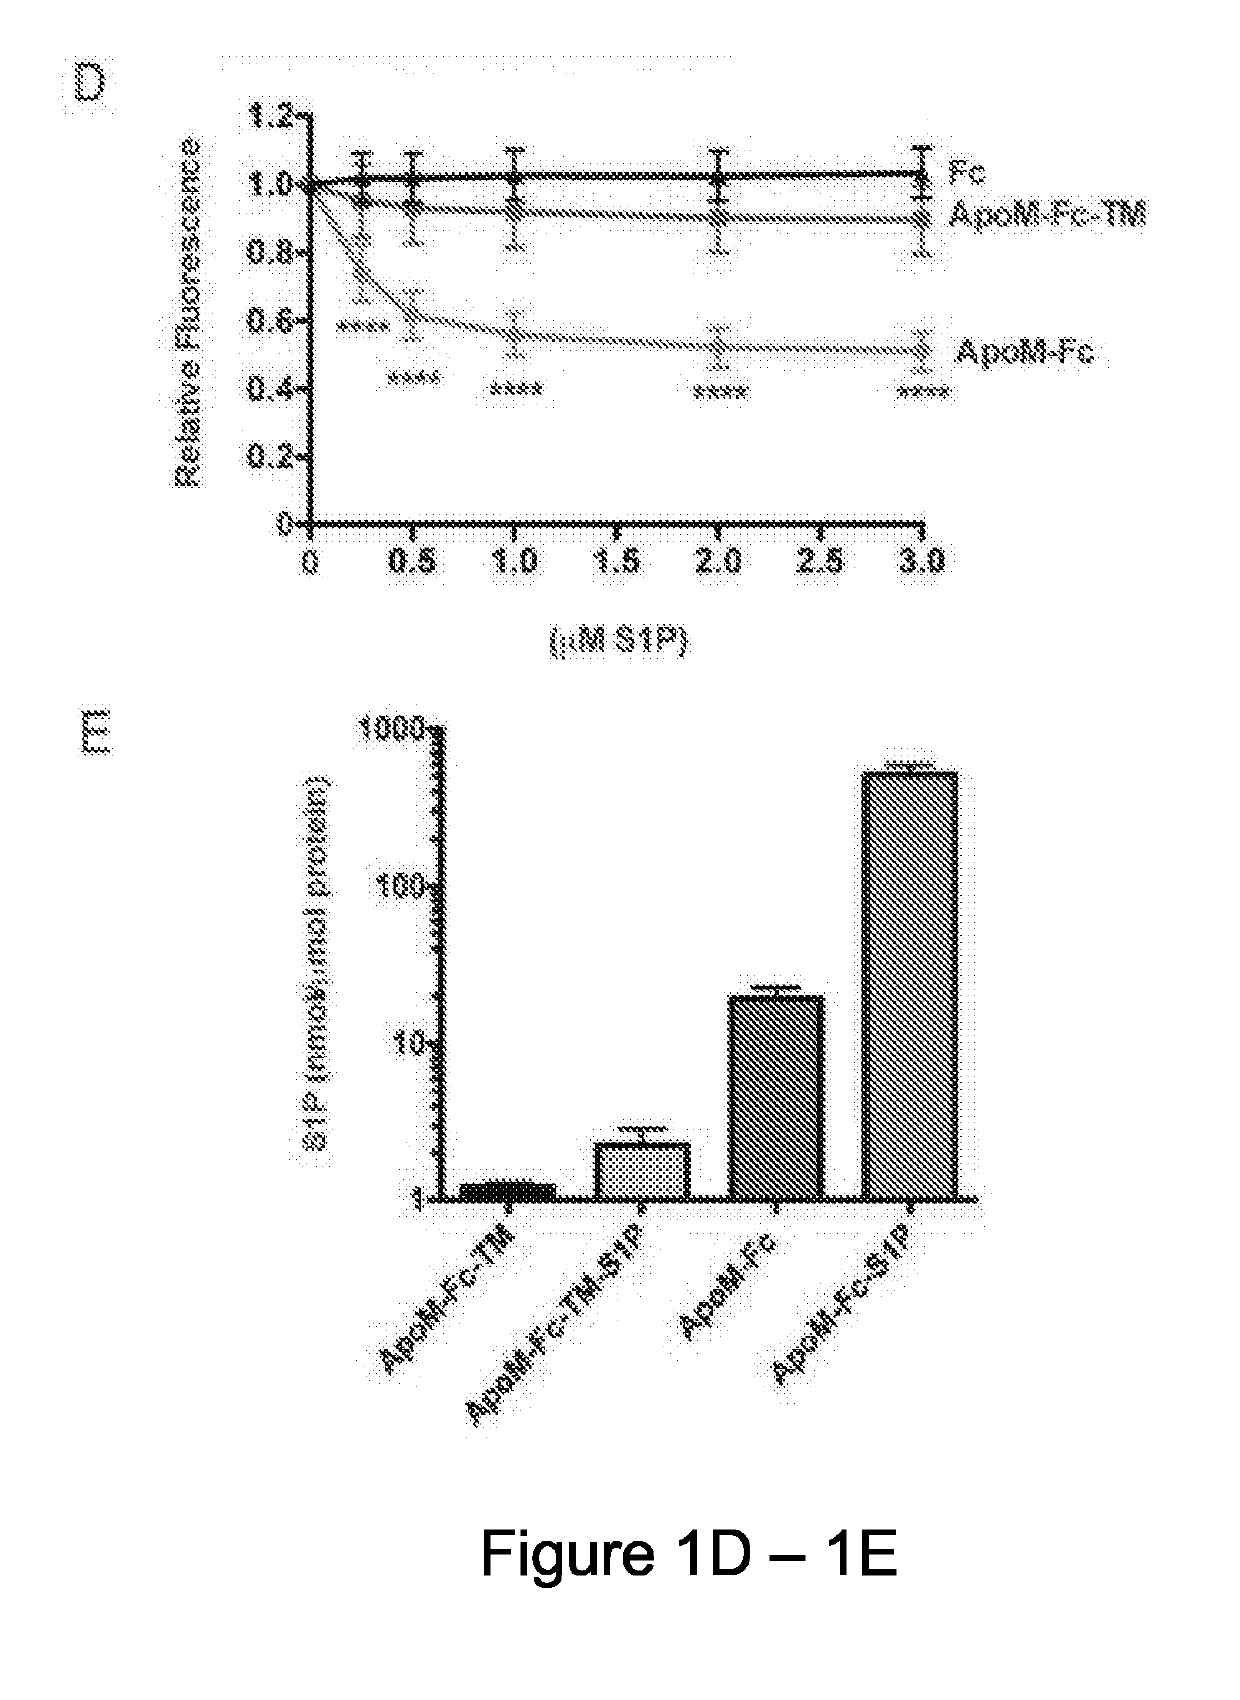 Apom-fc fusion proteins, complexes thereof with sphingosine 1-phosphate (S1P), and methods for treating vascular and non-vascular diseases